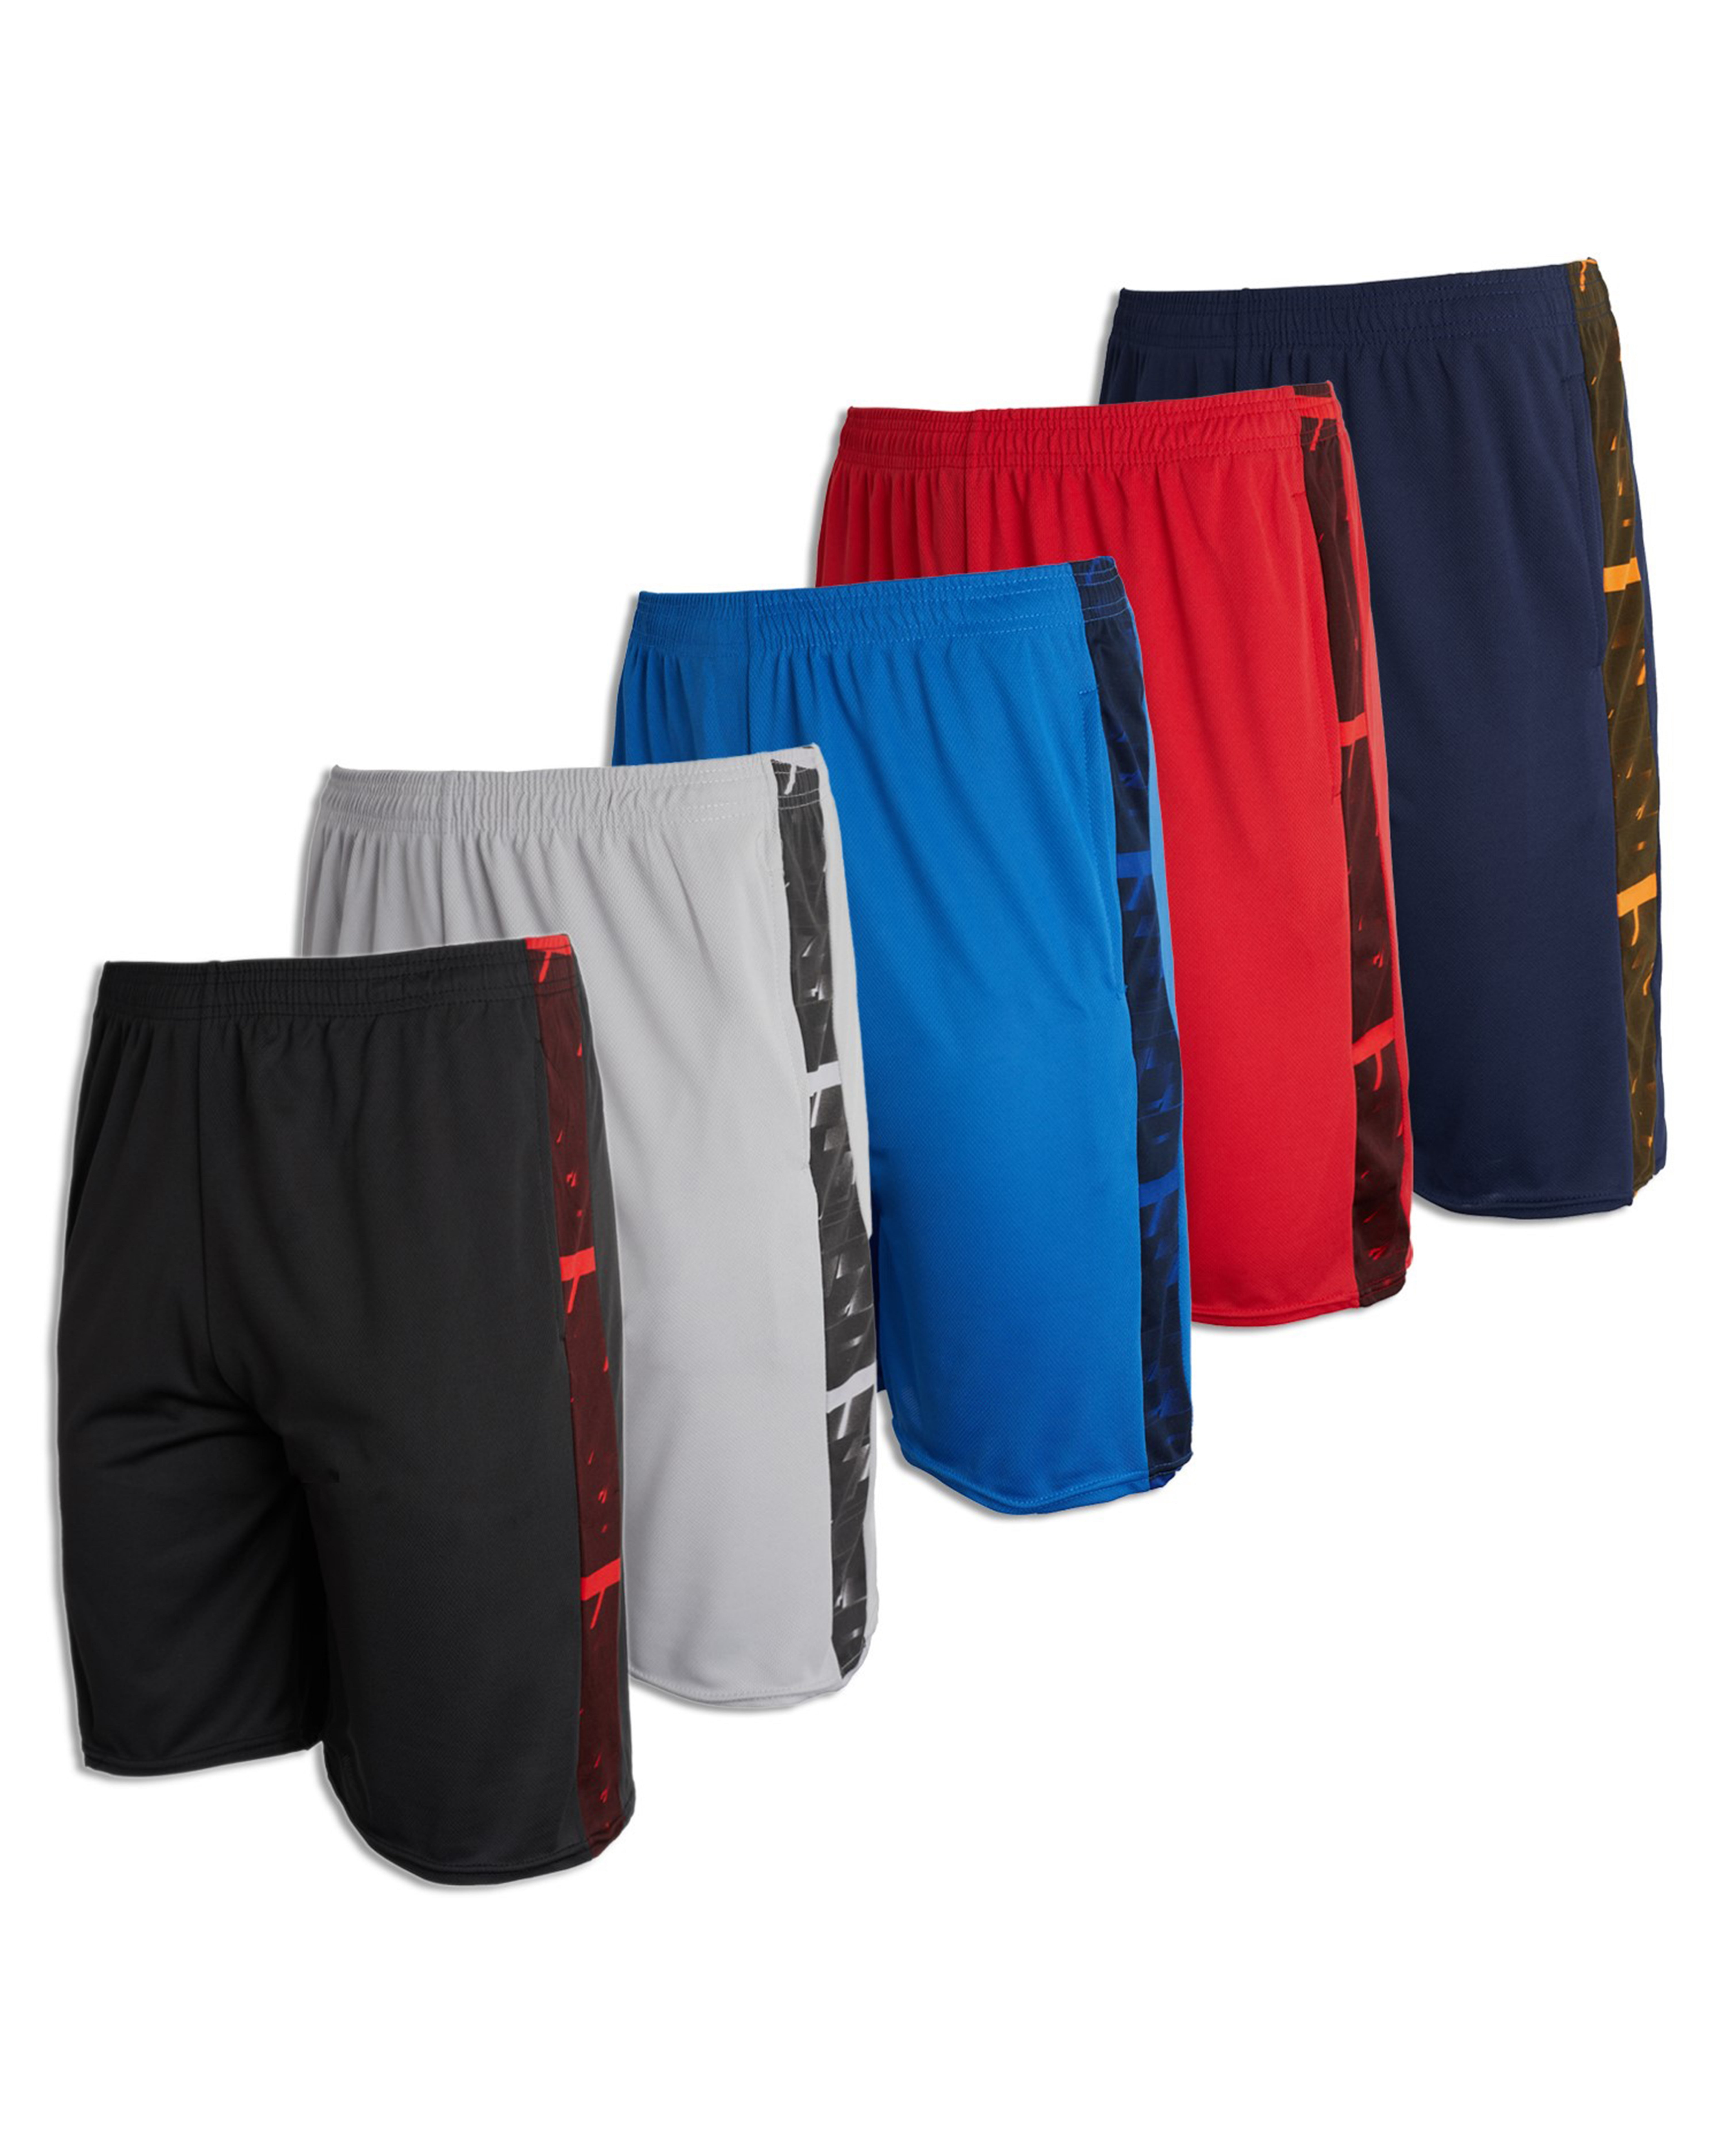  MJSTAR Men Women Sports Basketball Shorts Mesh Embroidered with  Pockets Workout Gym Fans Athletic Dry Shorts Gift S Gold : Arts, Crafts &  Sewing